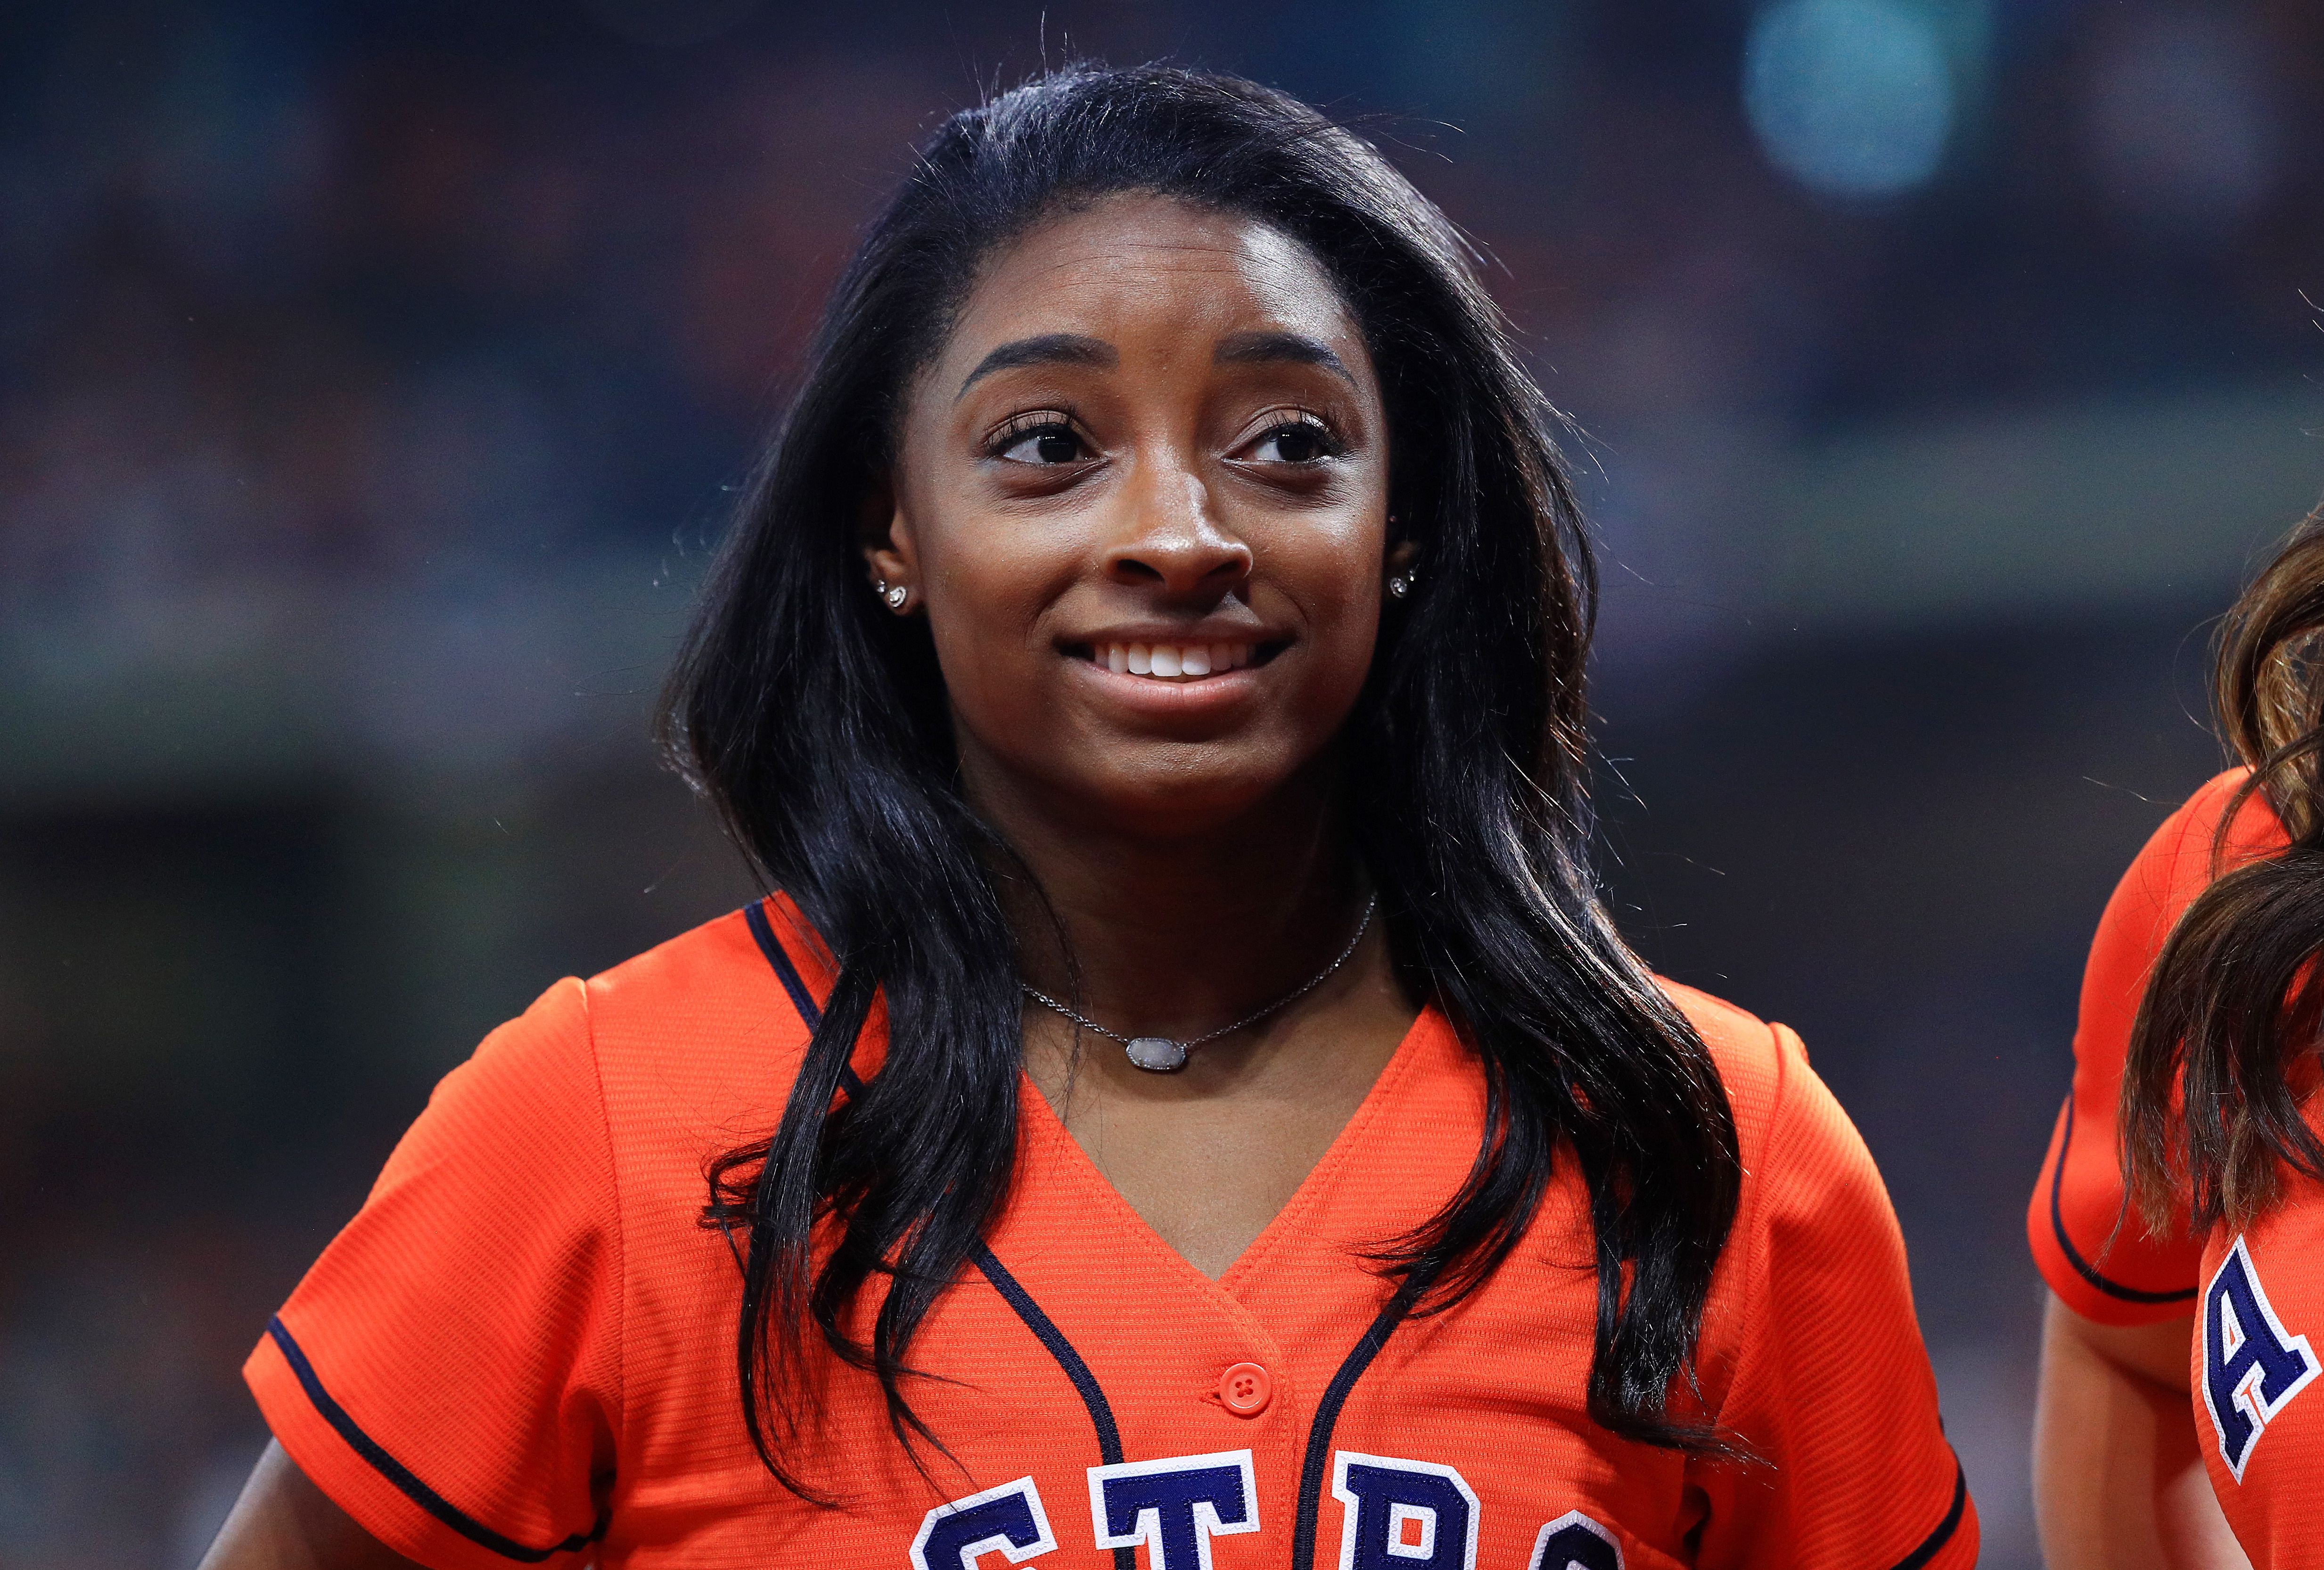 Gymnast Simone Biles at a game between the Houston Astros and the Washington Nationals on October 23, 2019 | Photo: Getty Images